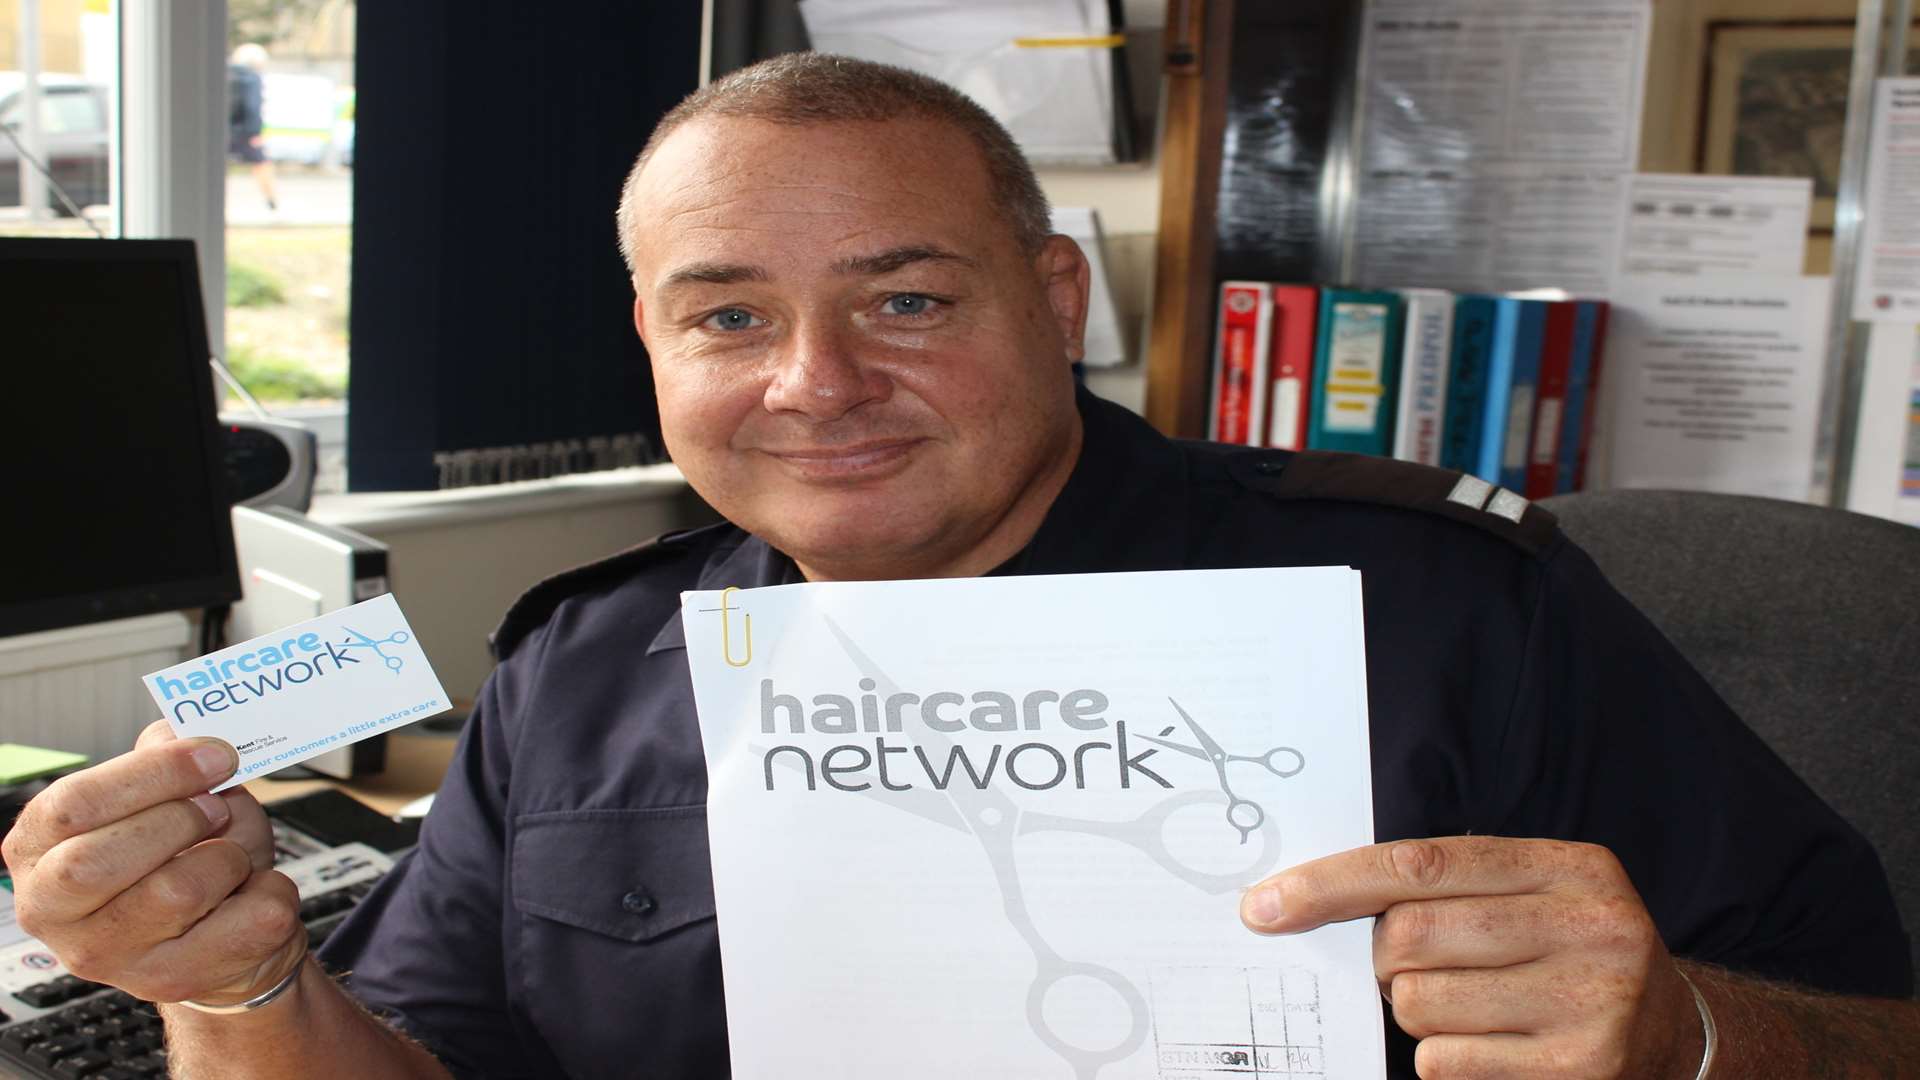 Kev Ford is asking hairdressers to promote the use of smoke alarms